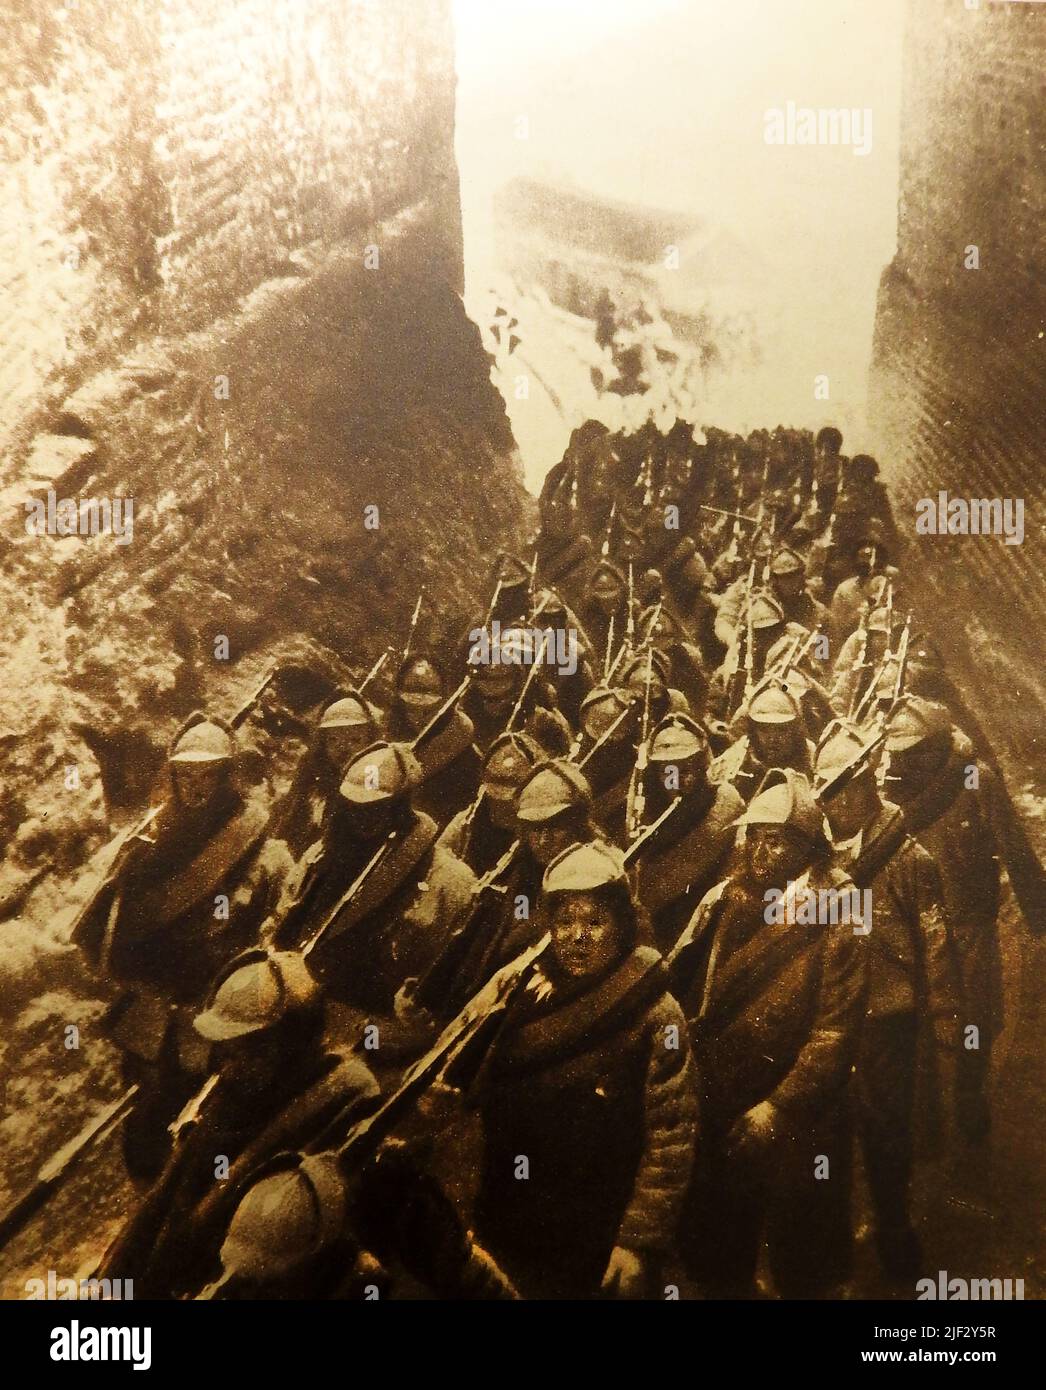 SINO-JAPANESE WAR - 1933 Japanese invading forces are seen passing through the great wall of China. Japan  invaded Manchuria in September 1931 and continued its occupation until 1945 seeking to solve its industrial depression using China's  raw materials.  -- 日清戦争 - 1933年、日本の侵略軍が中国の万里の長城を通過するのが見られる。  -- 甲午戰爭 - 1933年日本侵略軍穿過中國的長城。   --  甲午戰爭- 1933年日本侵略軍穿過中國嘅長城。 Stock Photo